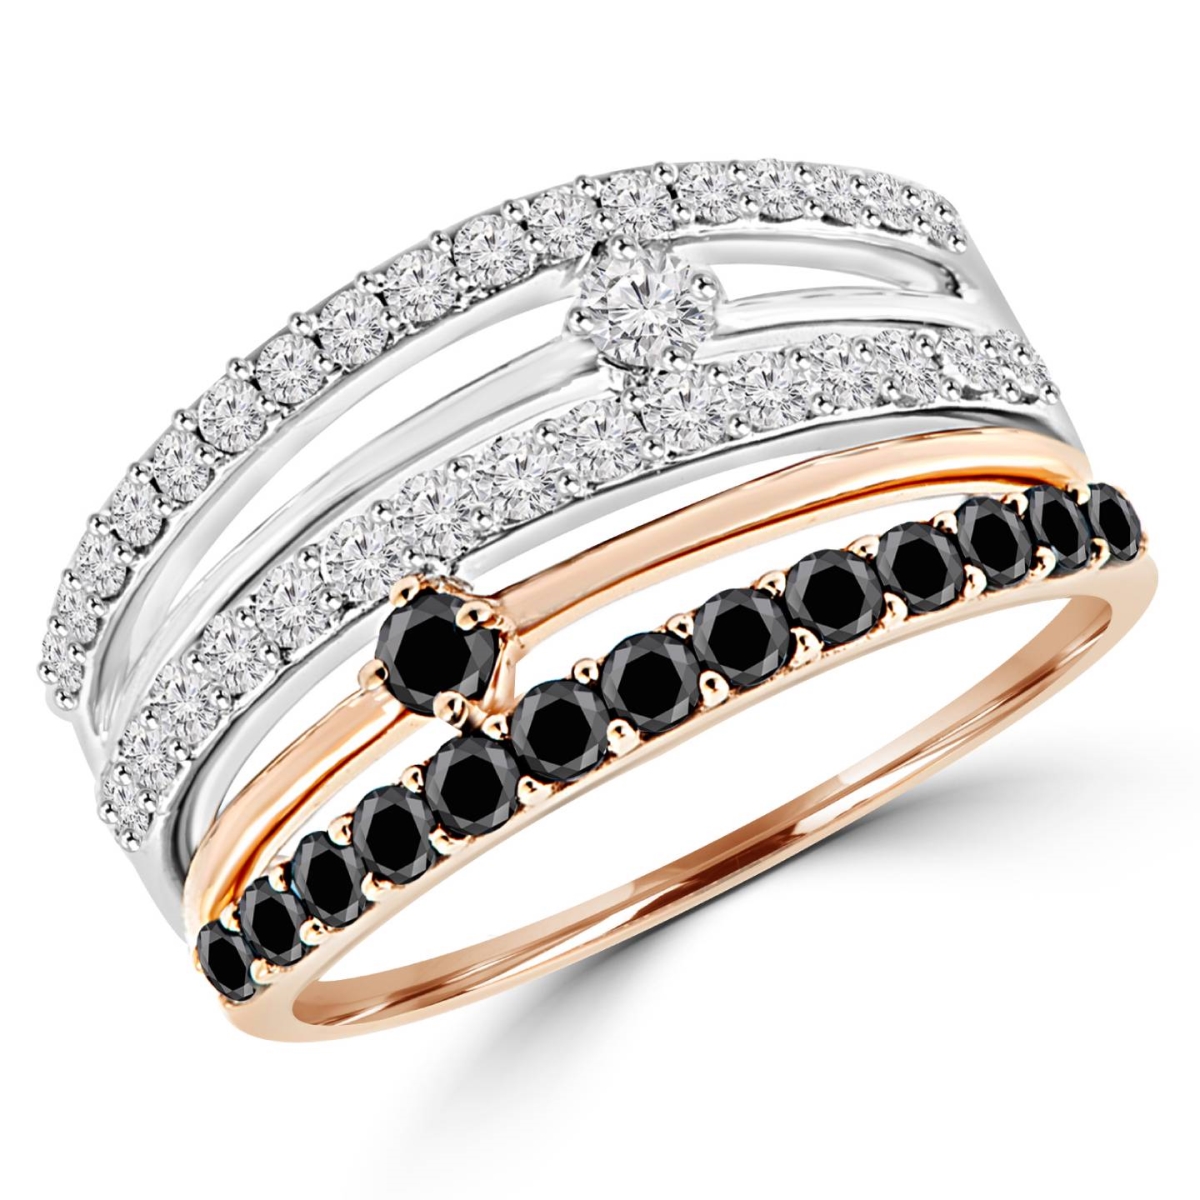 Picture of Majesty Diamonds MDR140001-3 0.8 CTW 5-row Black & White Diamond Fashion Cocktail Ring in 14K White & Rose Gold - Size 3